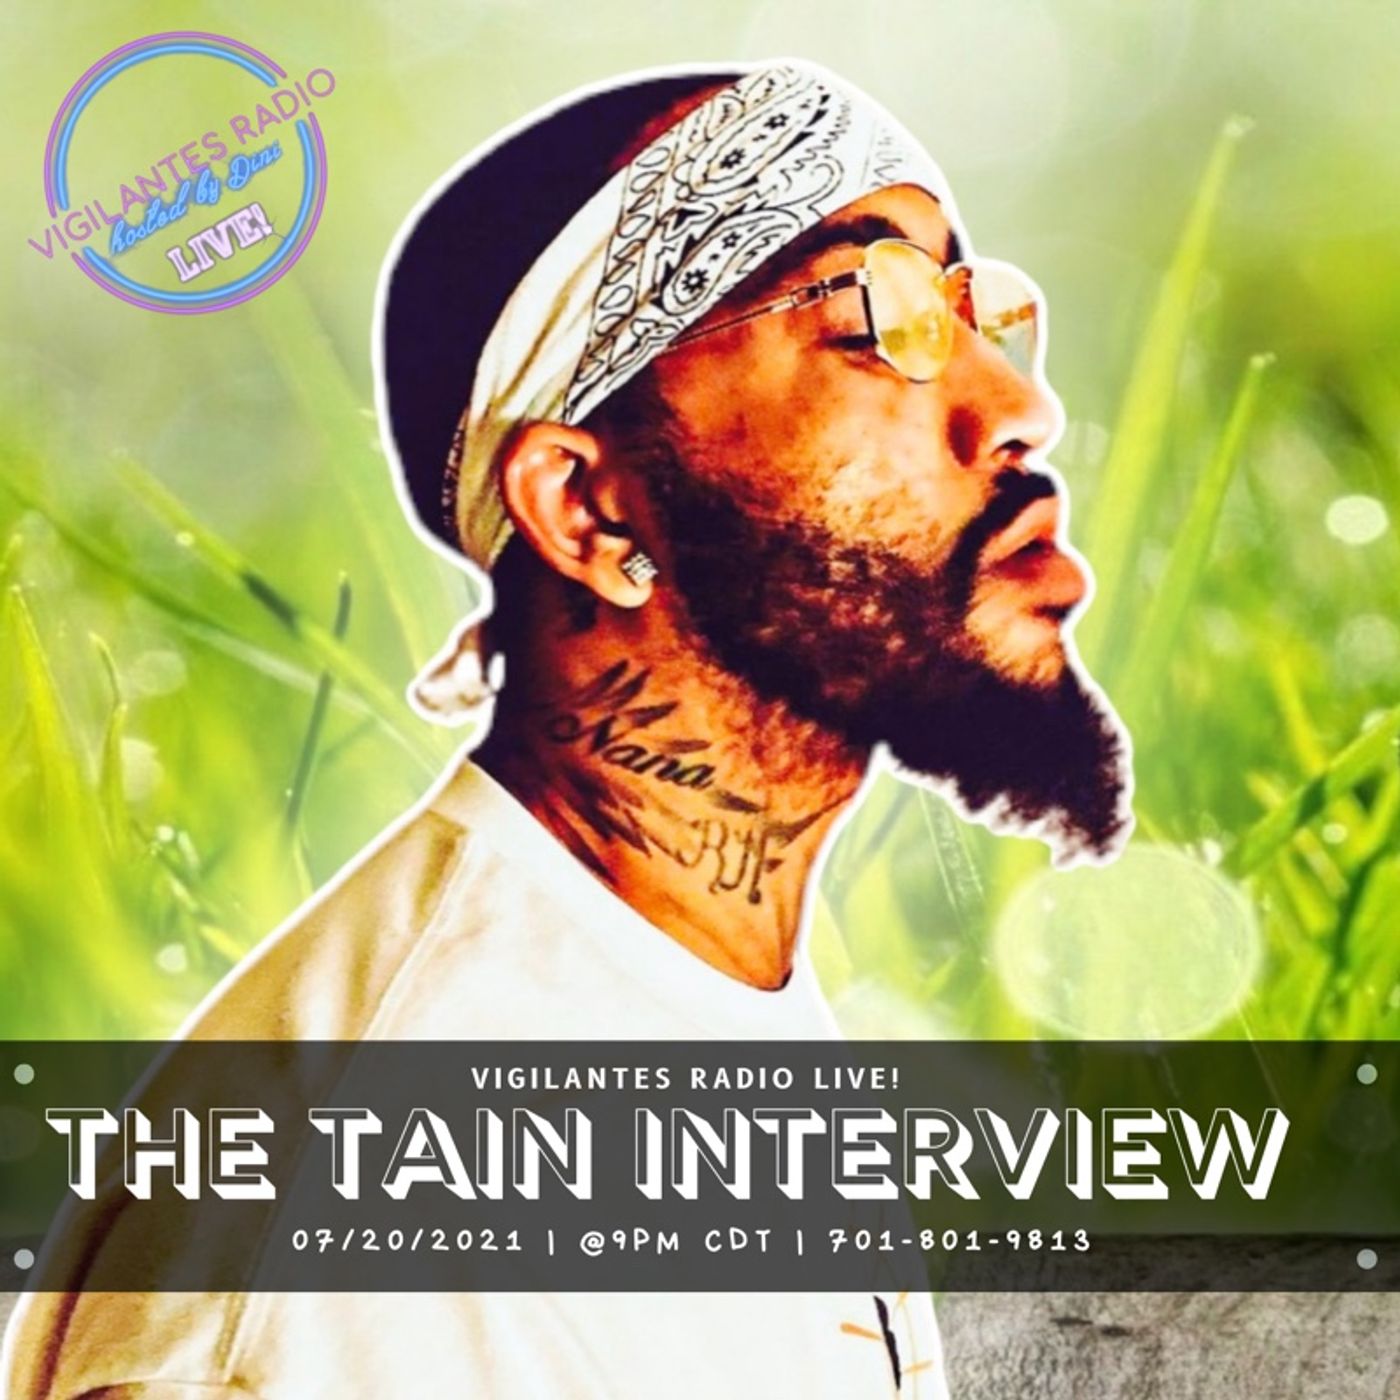 The TAIN Interview. Image